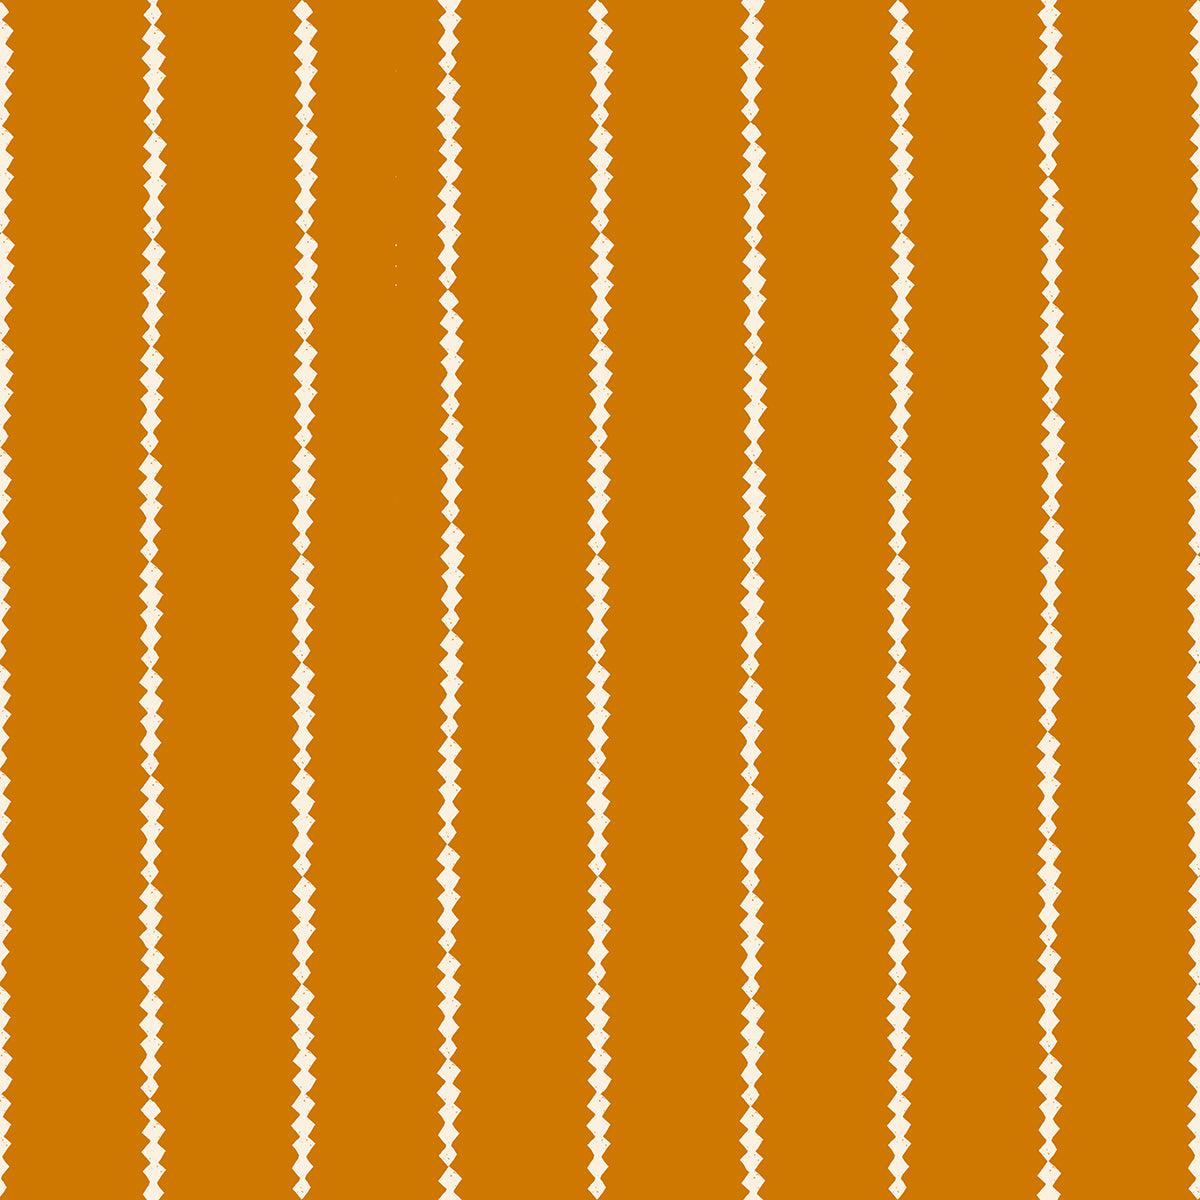 Ruby Star Society-Featherbed Caramel-fabric-gather here online